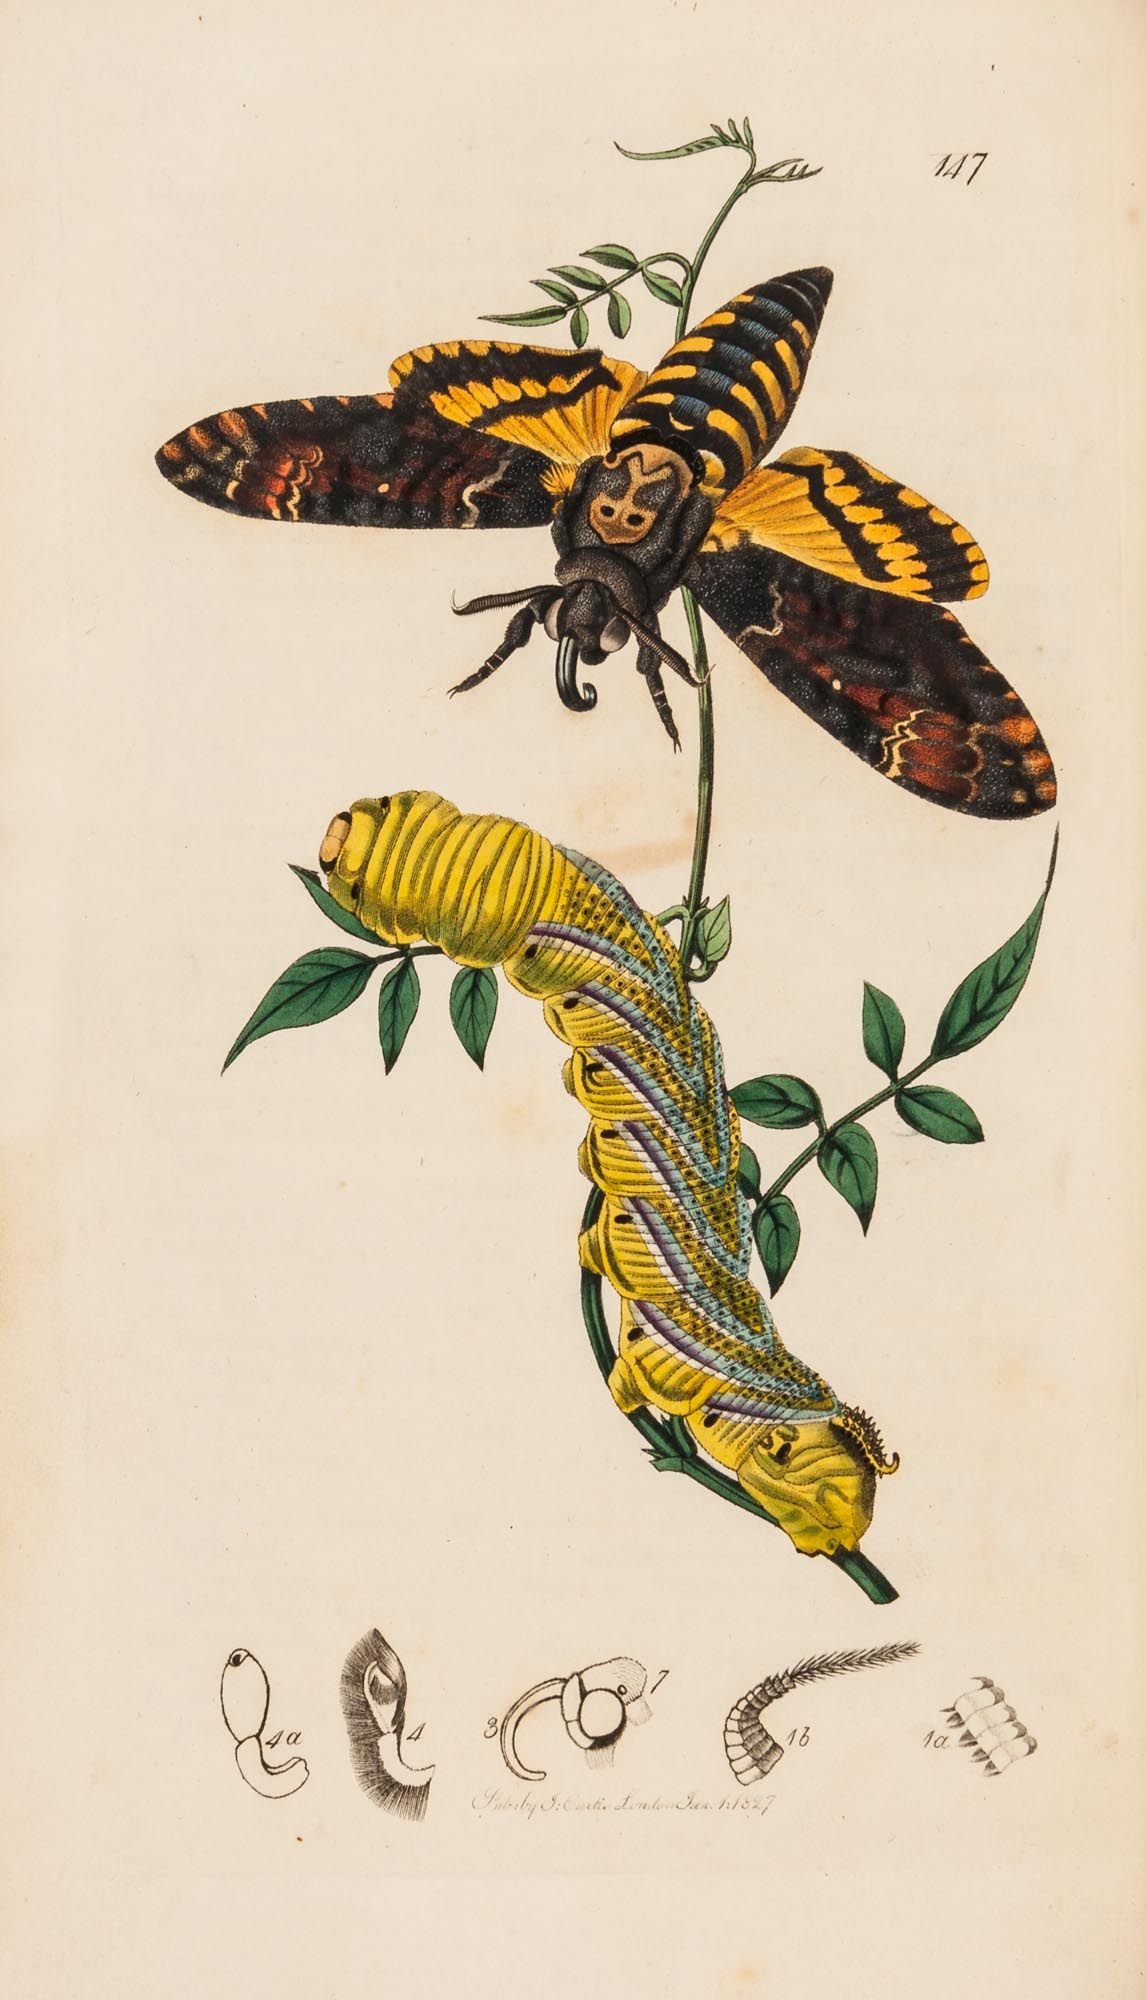 Curtis (John) - British Entomology, being illustrations and descriptions of the Genera of Insects